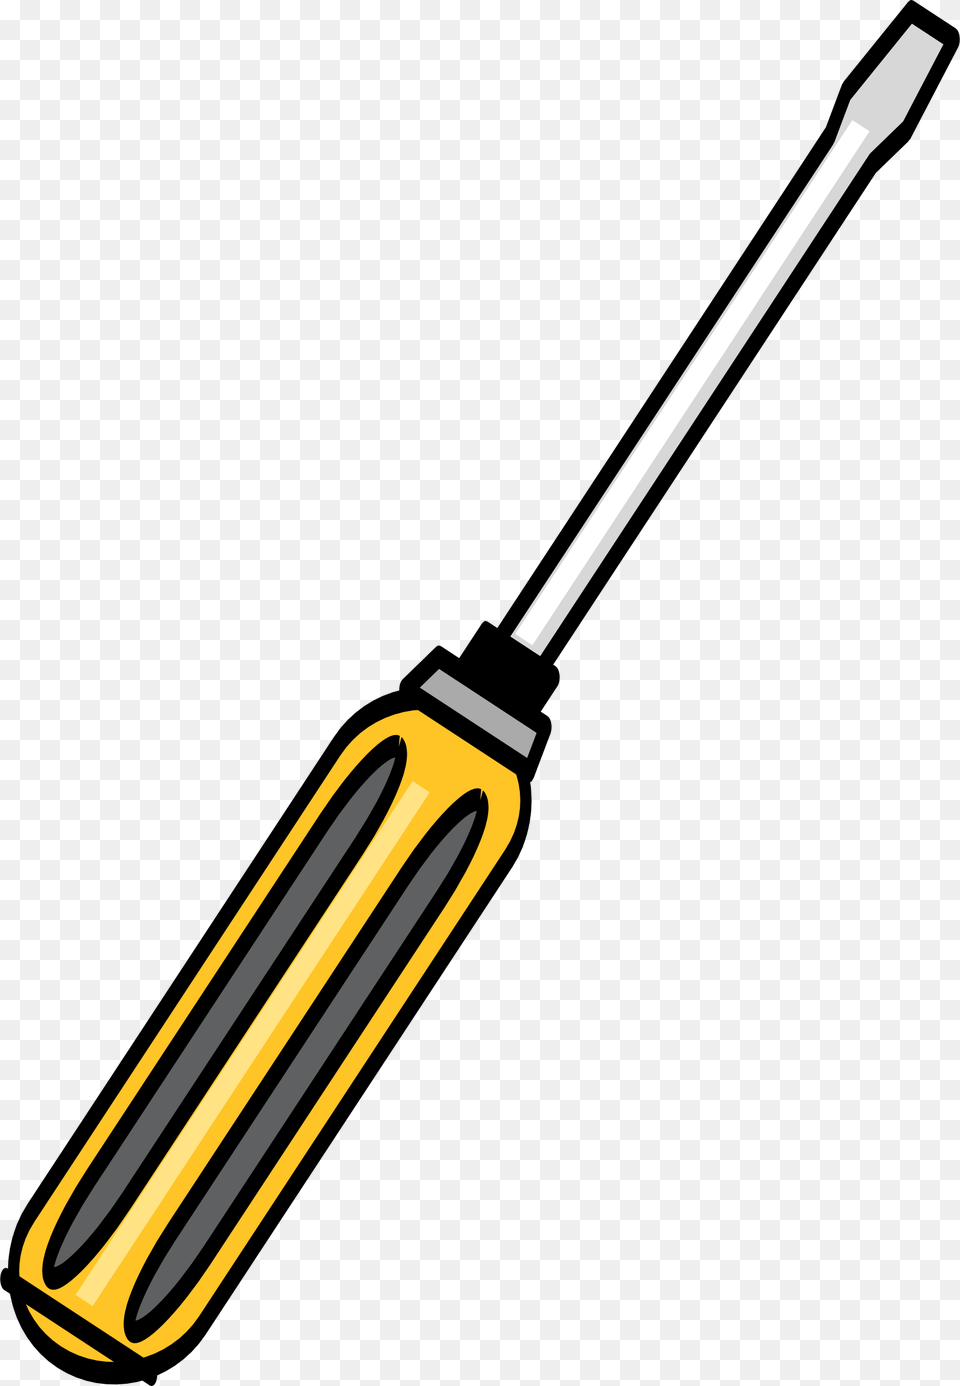 This Icons Design Of Simple Screwdriver, Device, Tool, Blade, Dagger Png Image